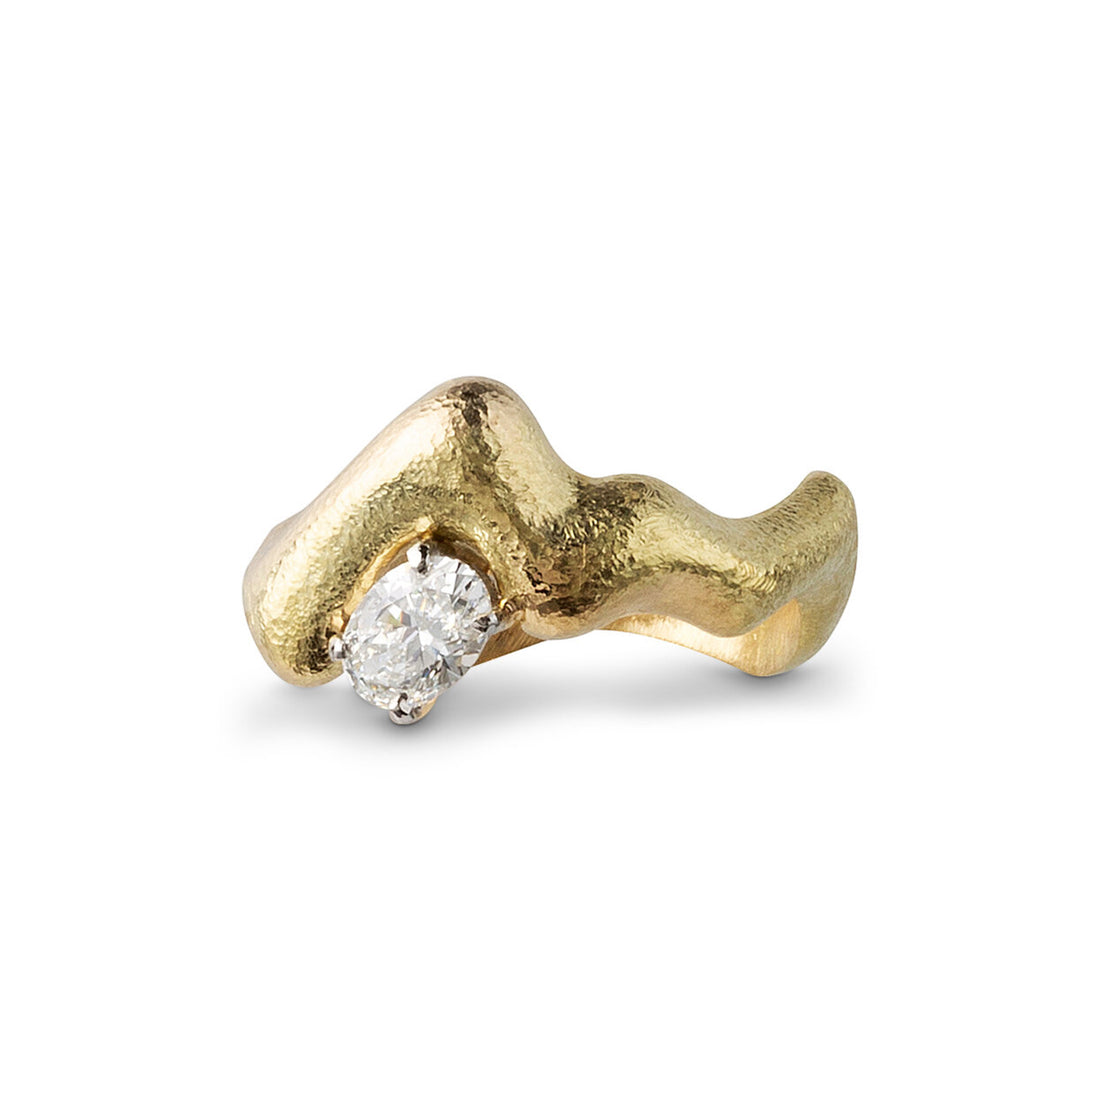  Sculptural Ring with Oval Diamond by Jessie Thomas | The Cut London